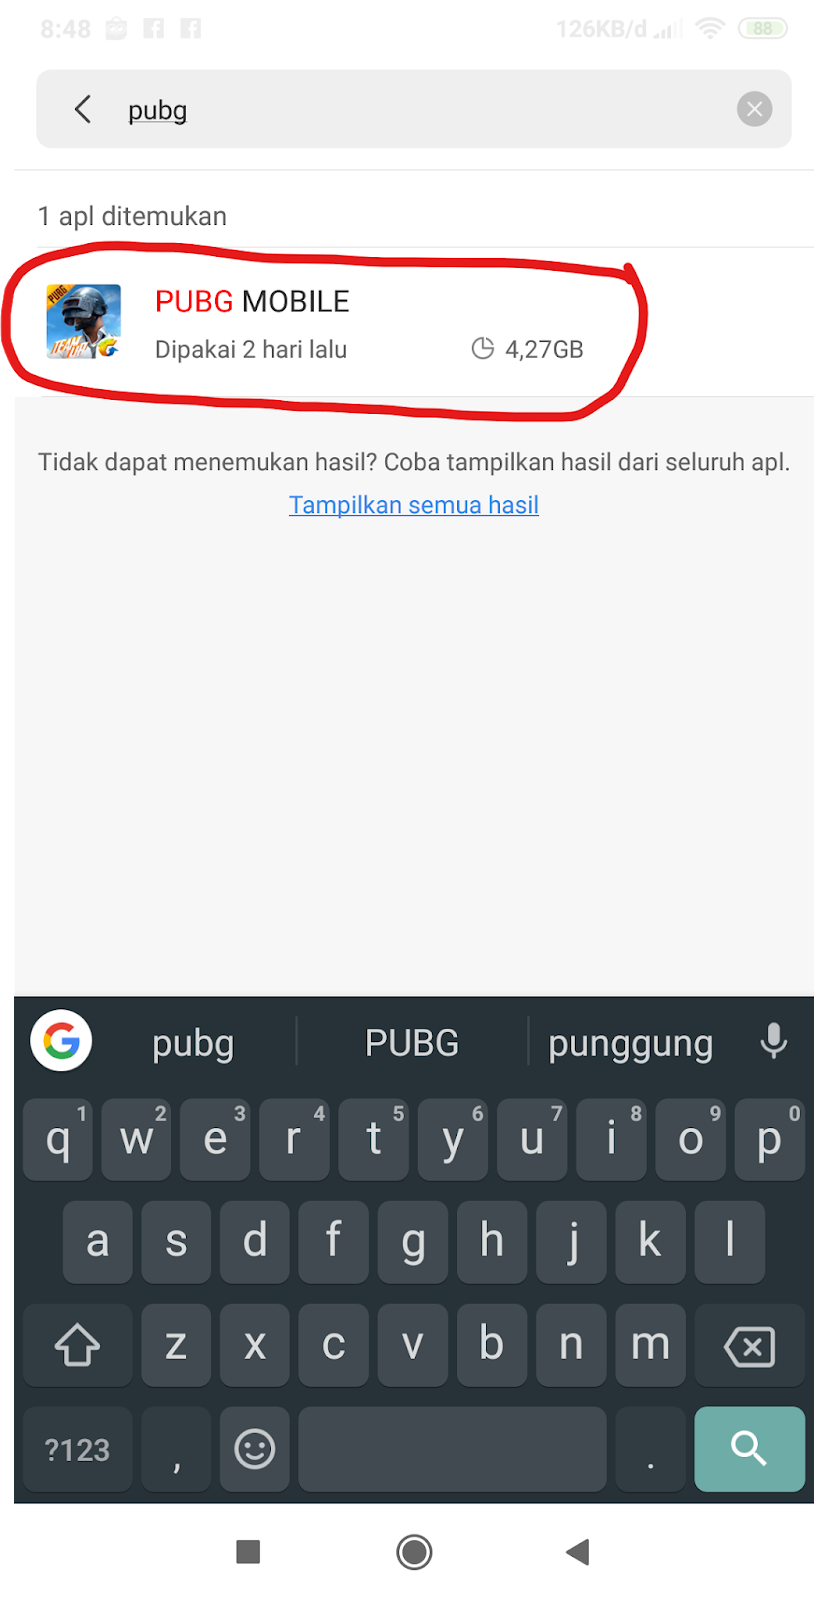 Download failed because the resources could not be found pubg mobile фото 65